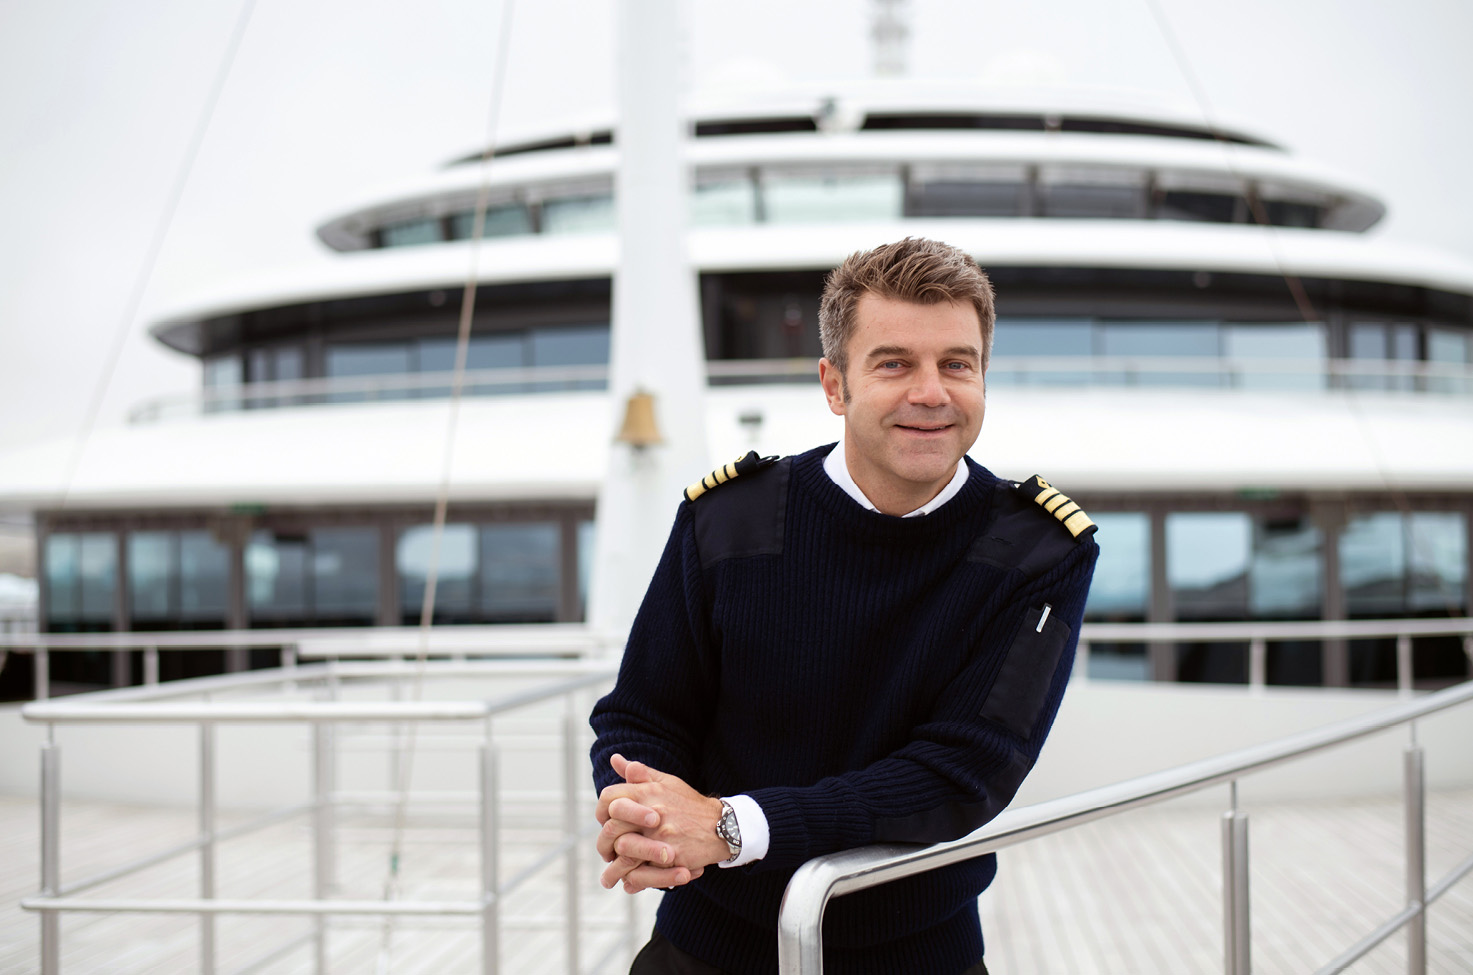 The Scenic Eclipse captain stands on the deck of the ship smiling and wearing a dark jumper